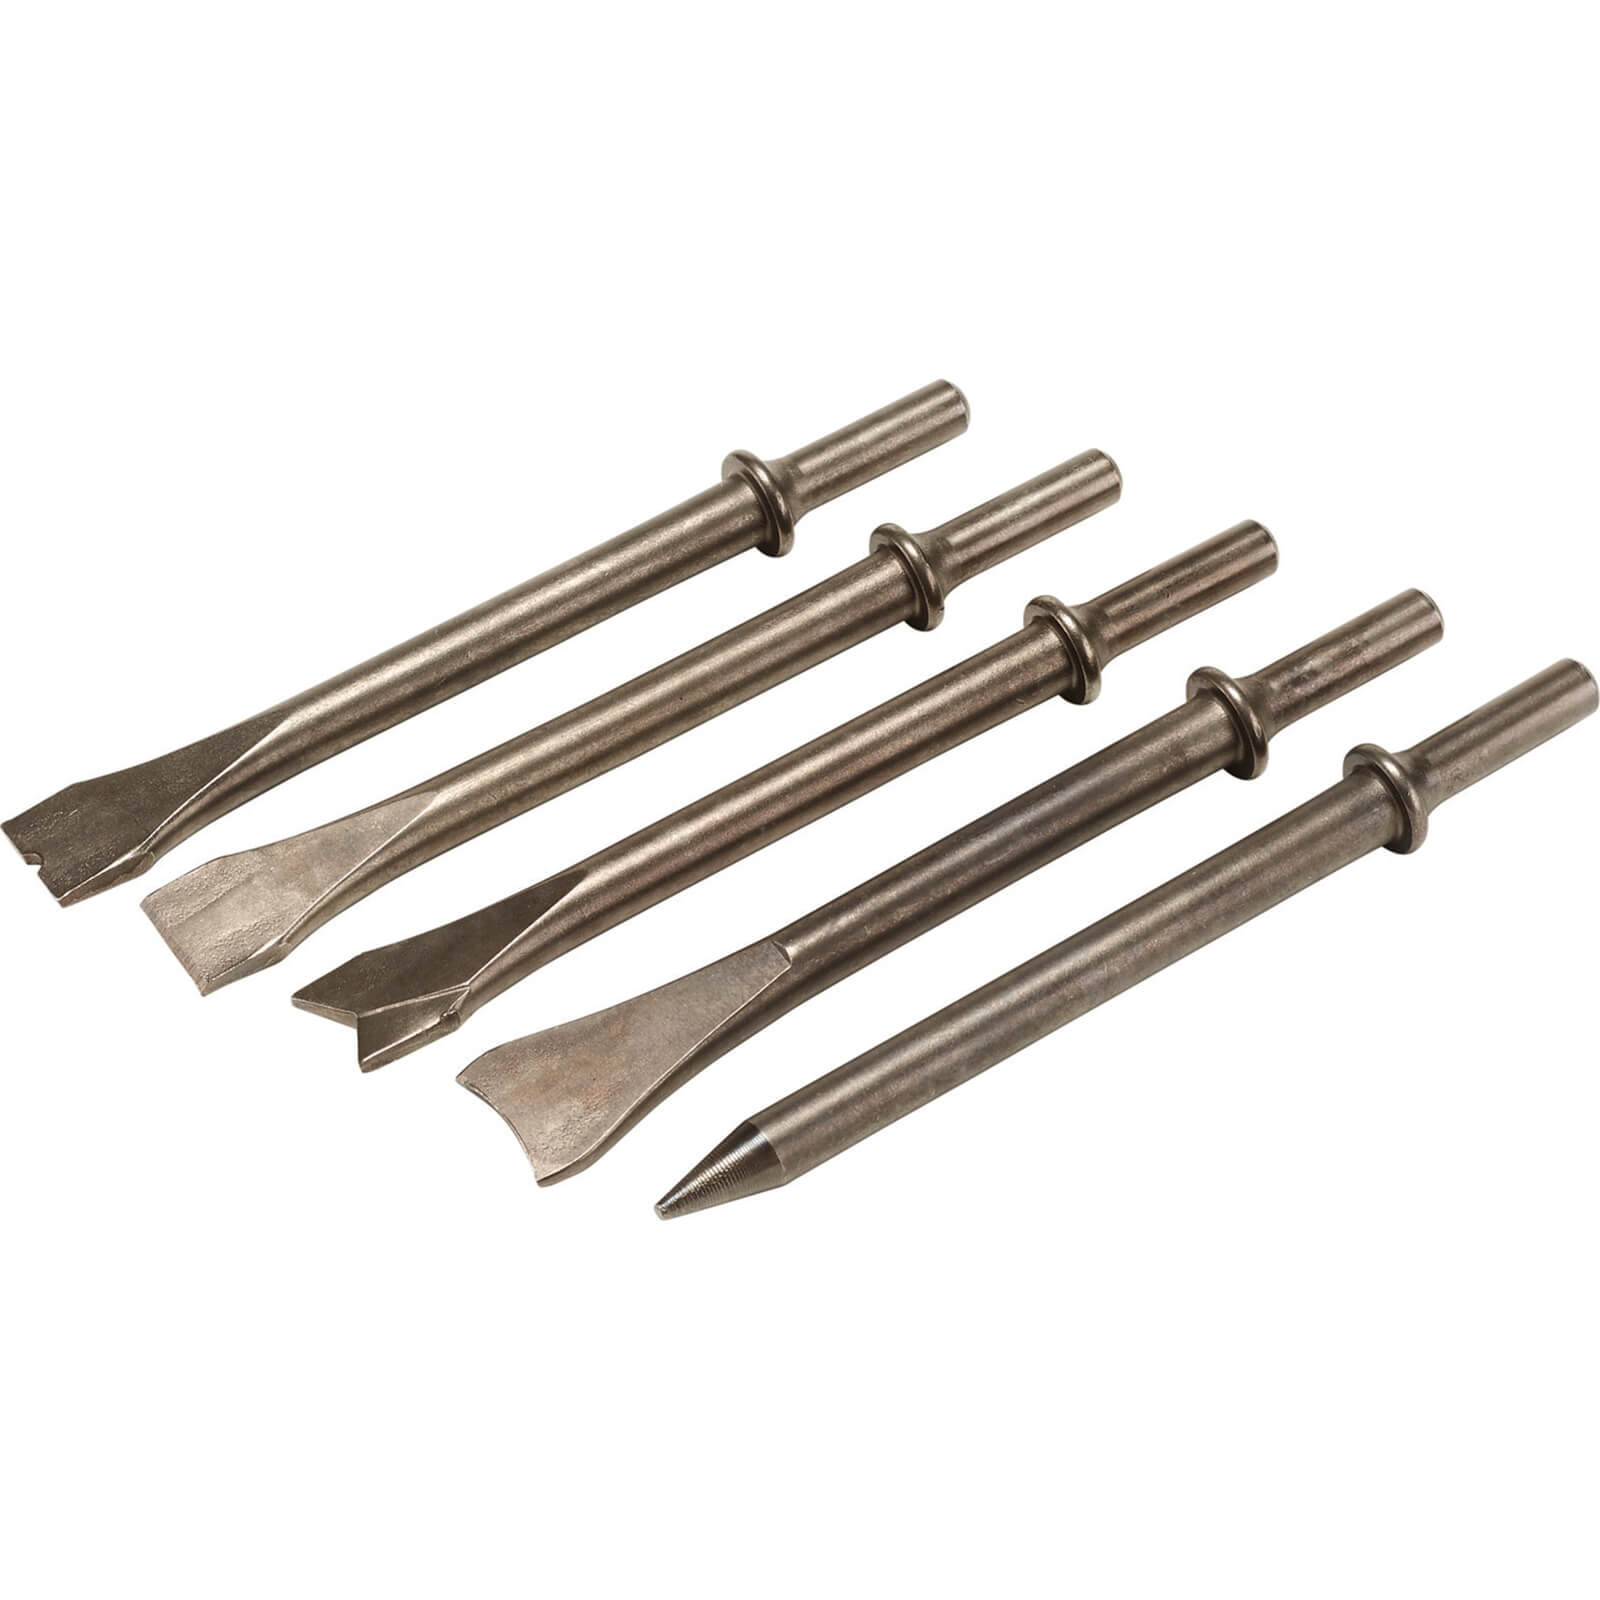 Image of Draper 4 Piece 10mm Shank Chisel Set for Air Hammers